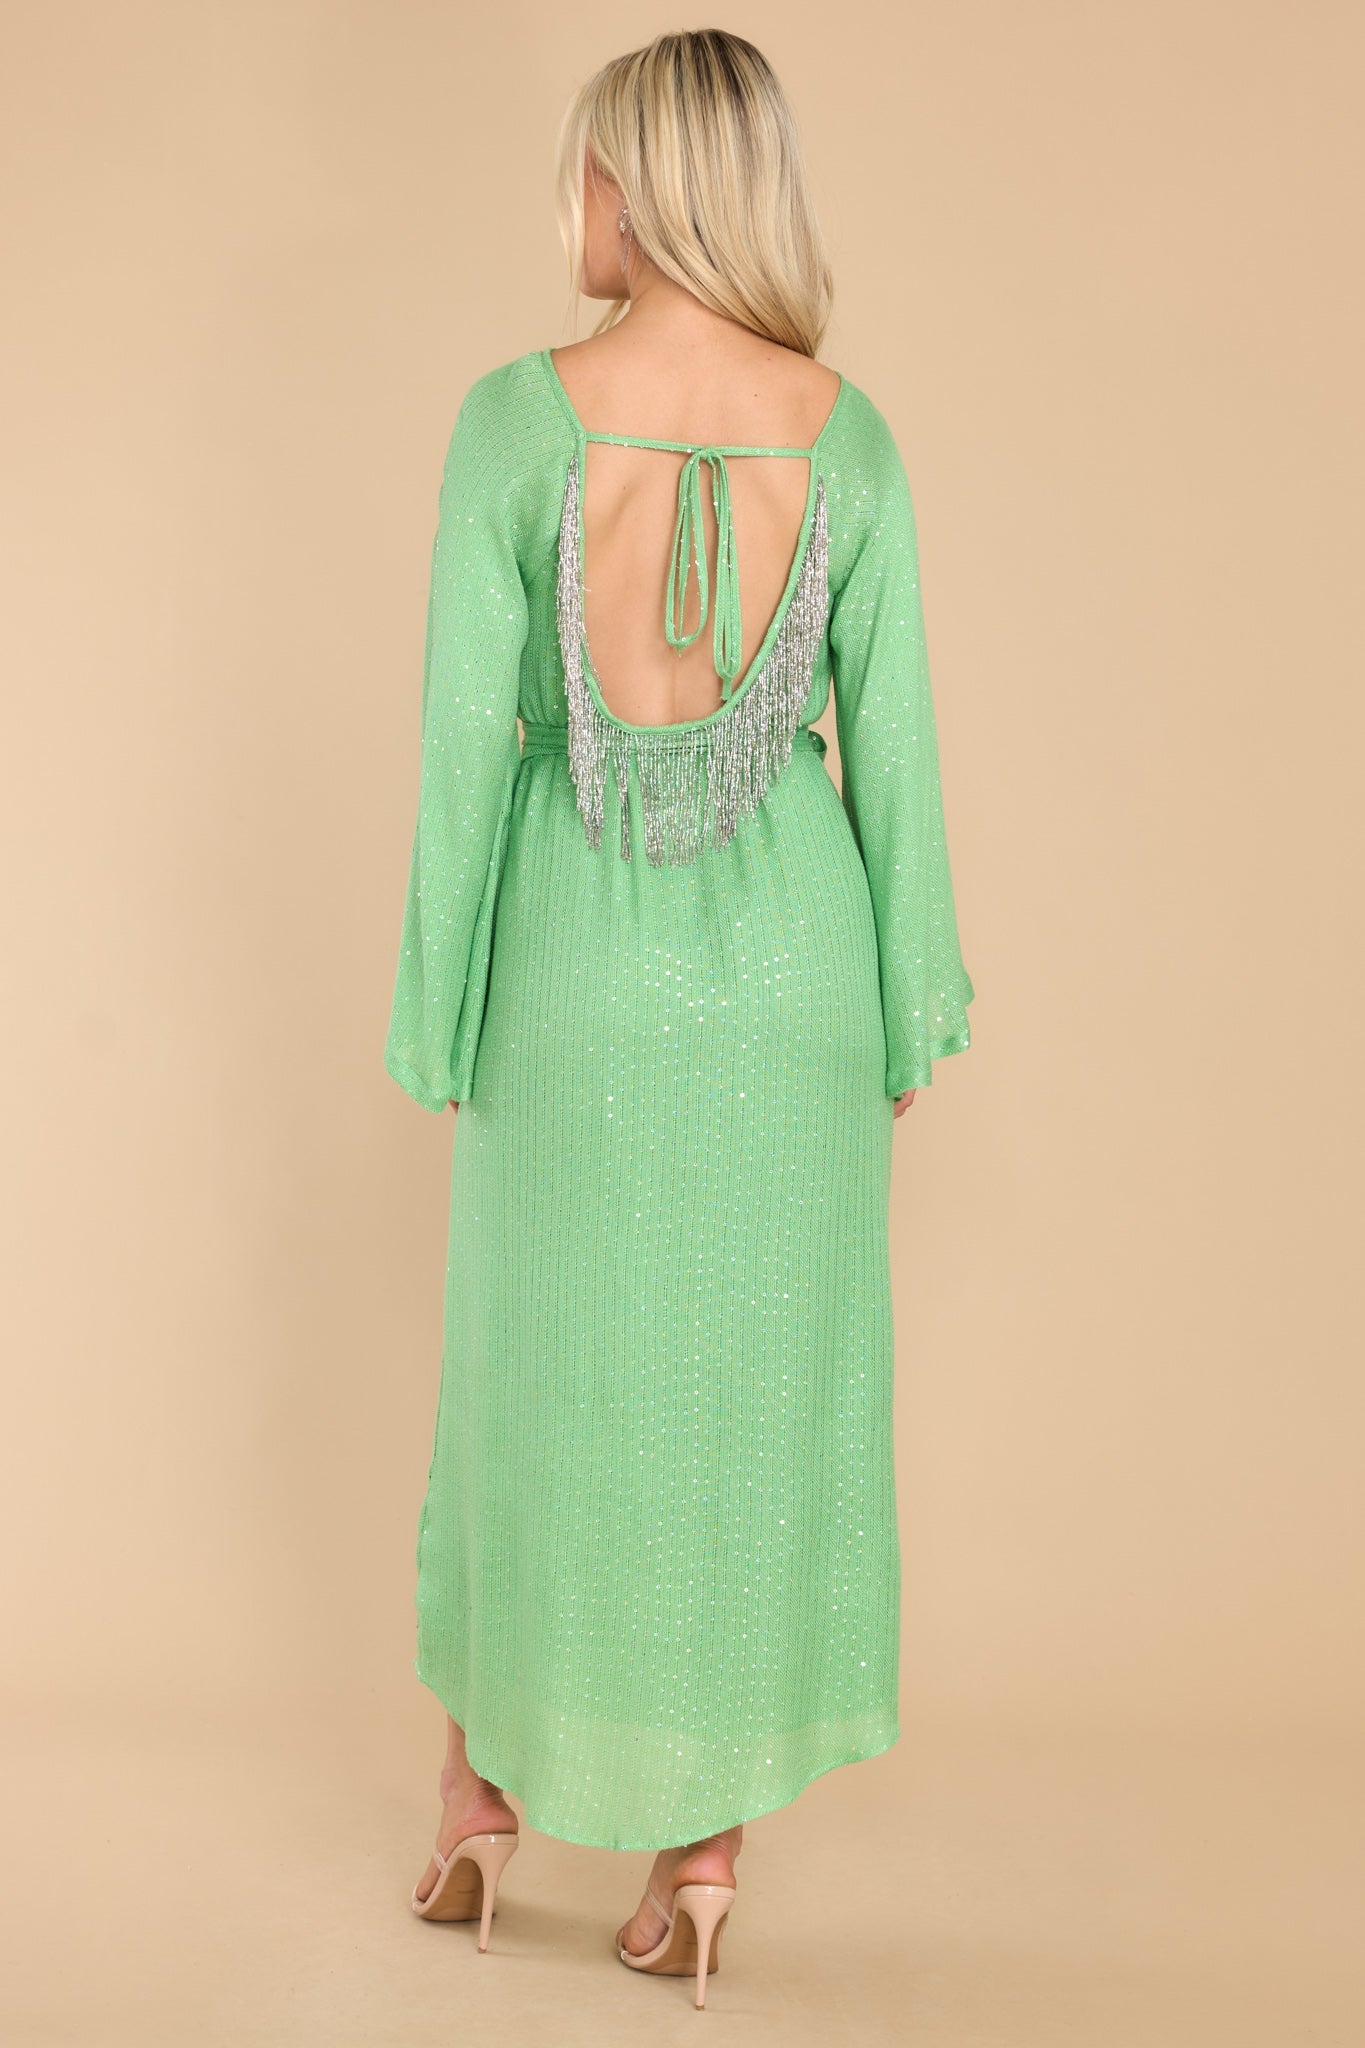 This  green dress features a high neckline, an open back with a self-tie, sequins throughout, beaded fringe detailing at the back, and an optional tie belt.